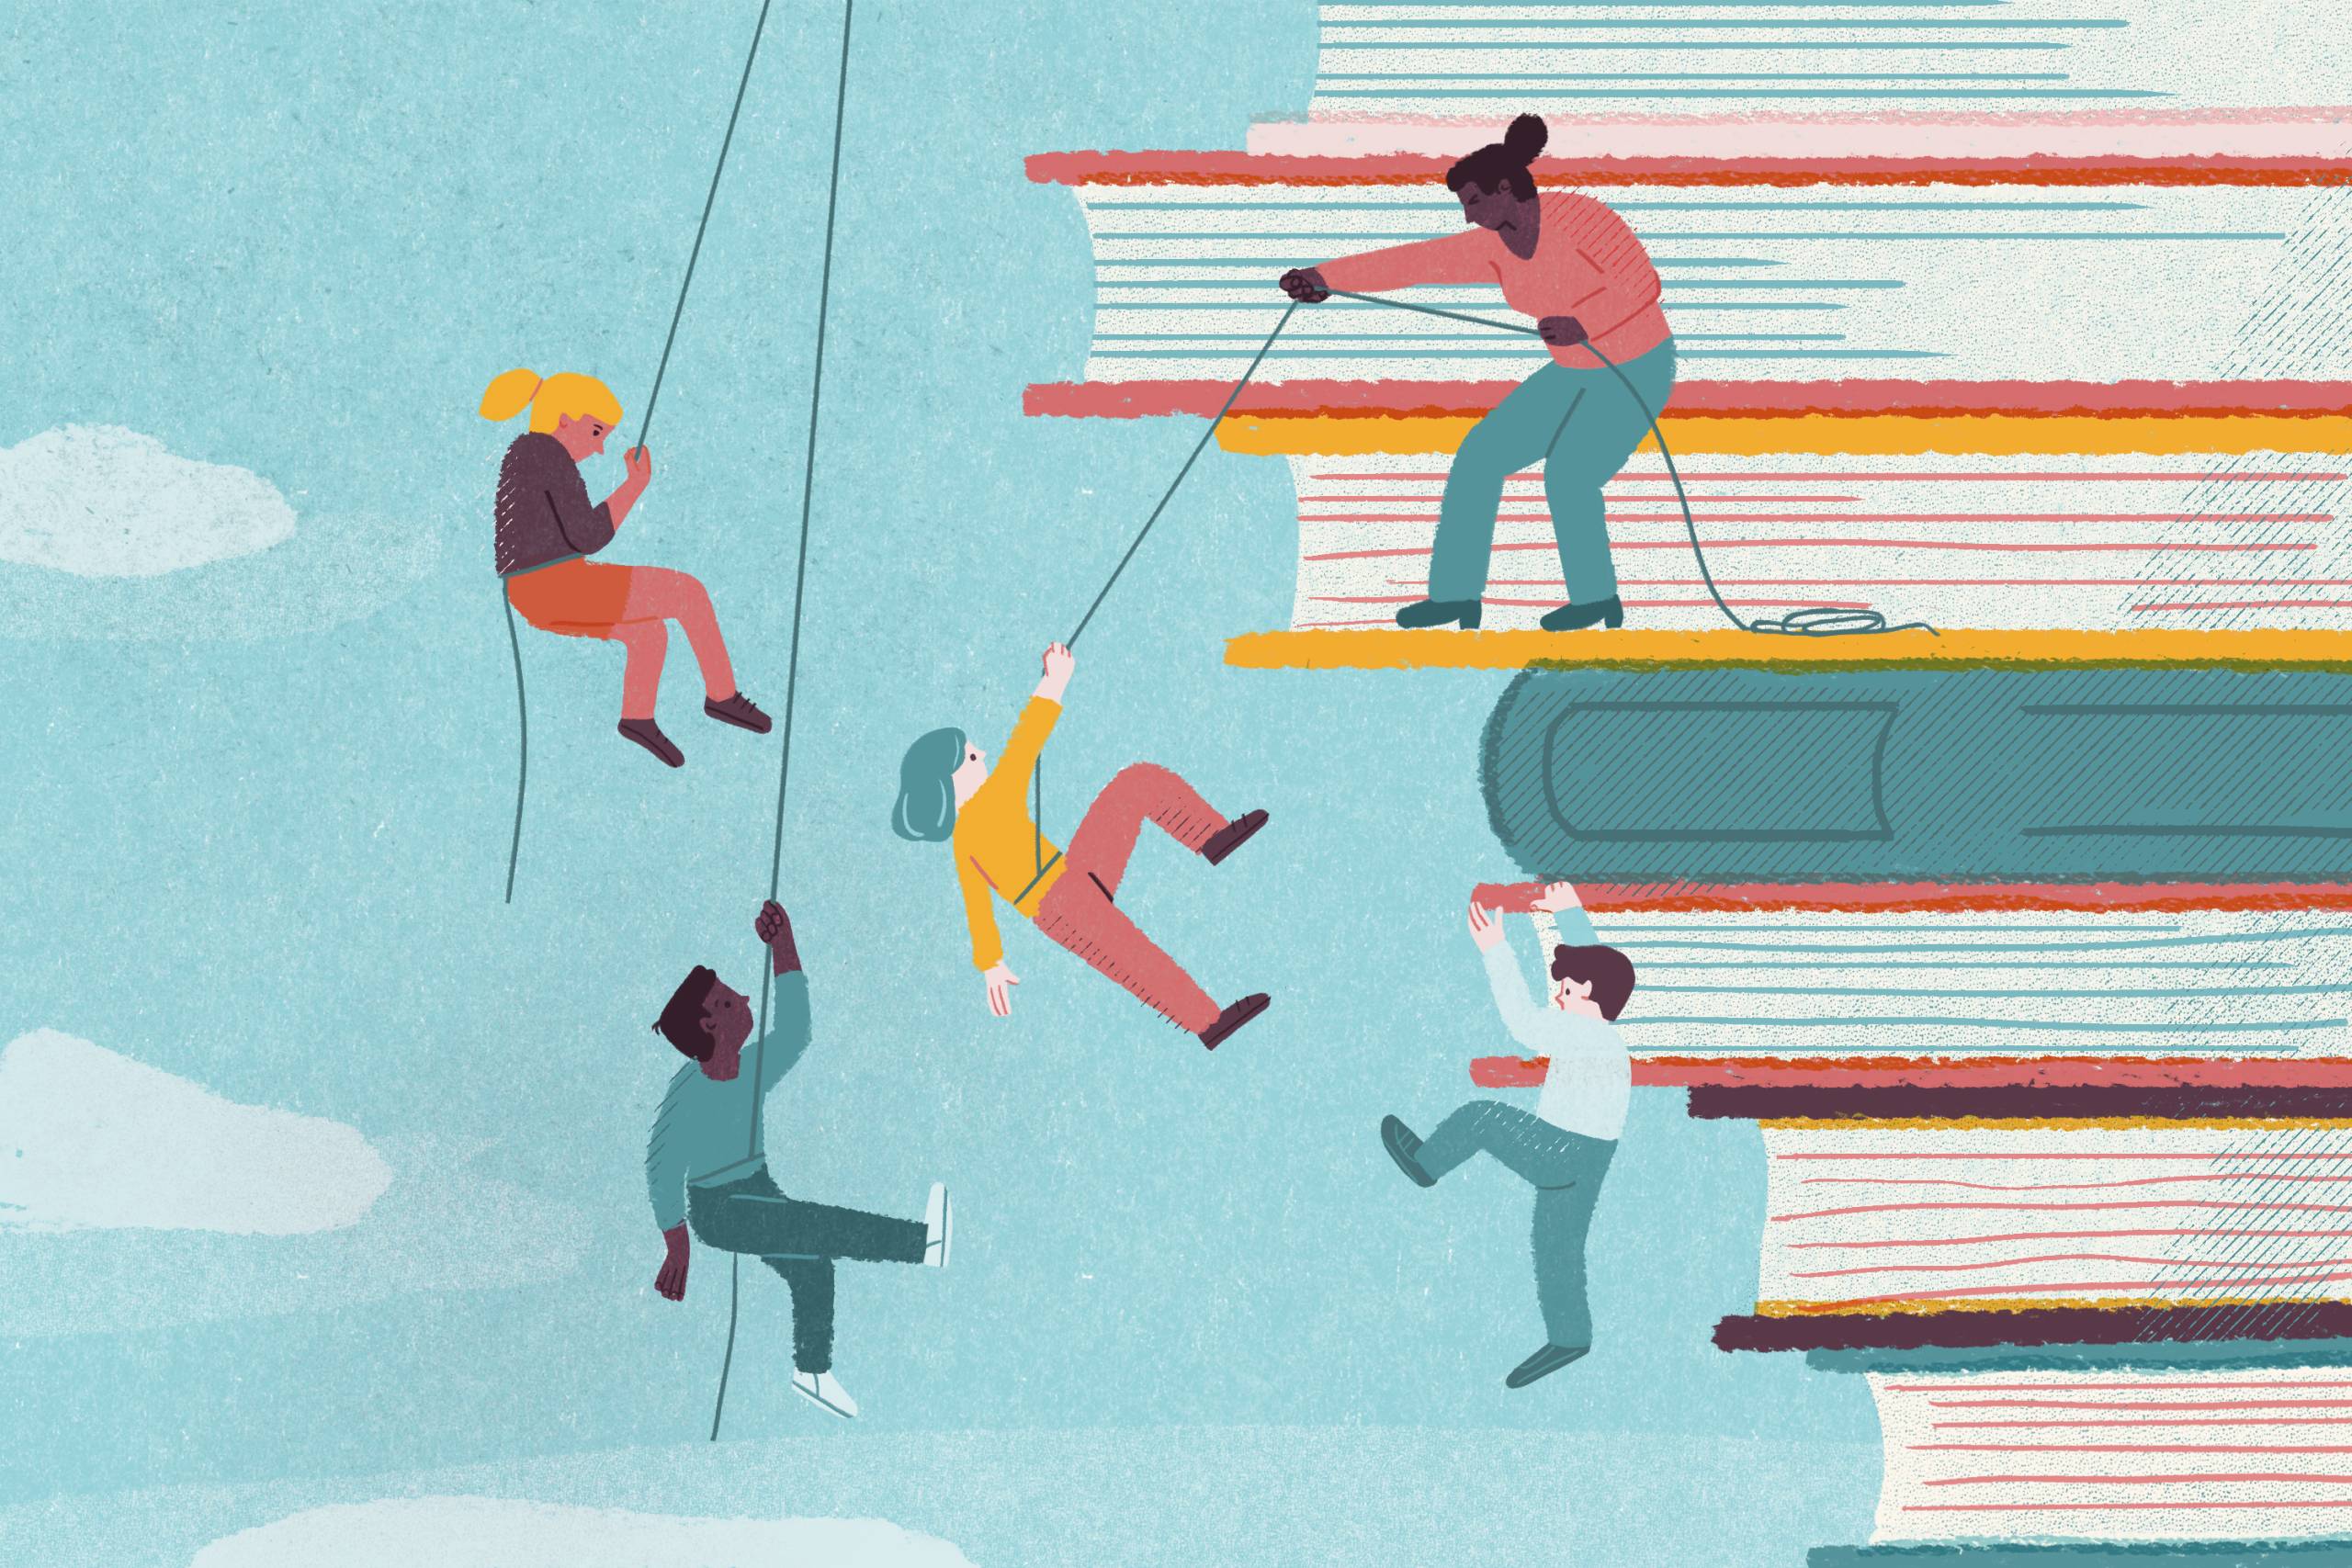 Illustration: Students scale a pile of books, as a teacher helps them up with ropes.